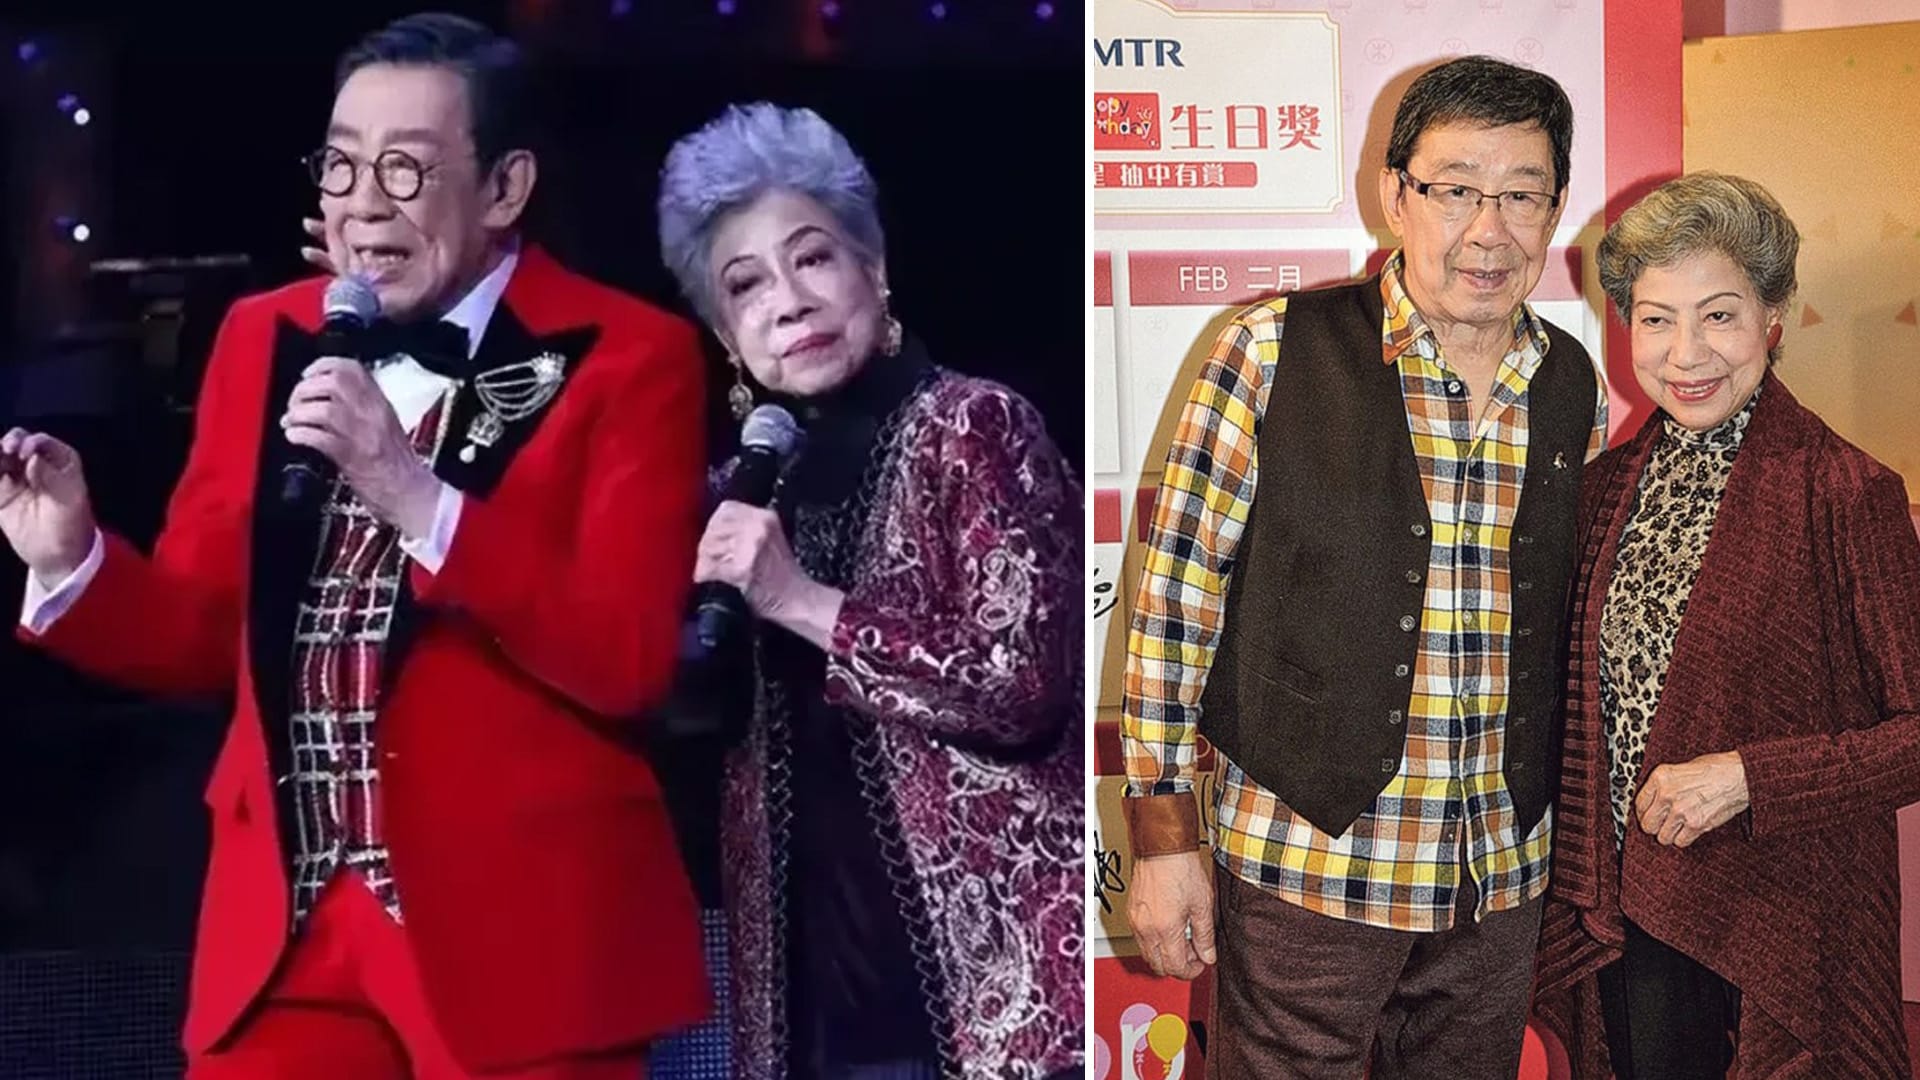 "A Beautiful Rumour": Wu Fung, 90, Laughs Off Fake News That He And Law Lan, 88, Are Engaged